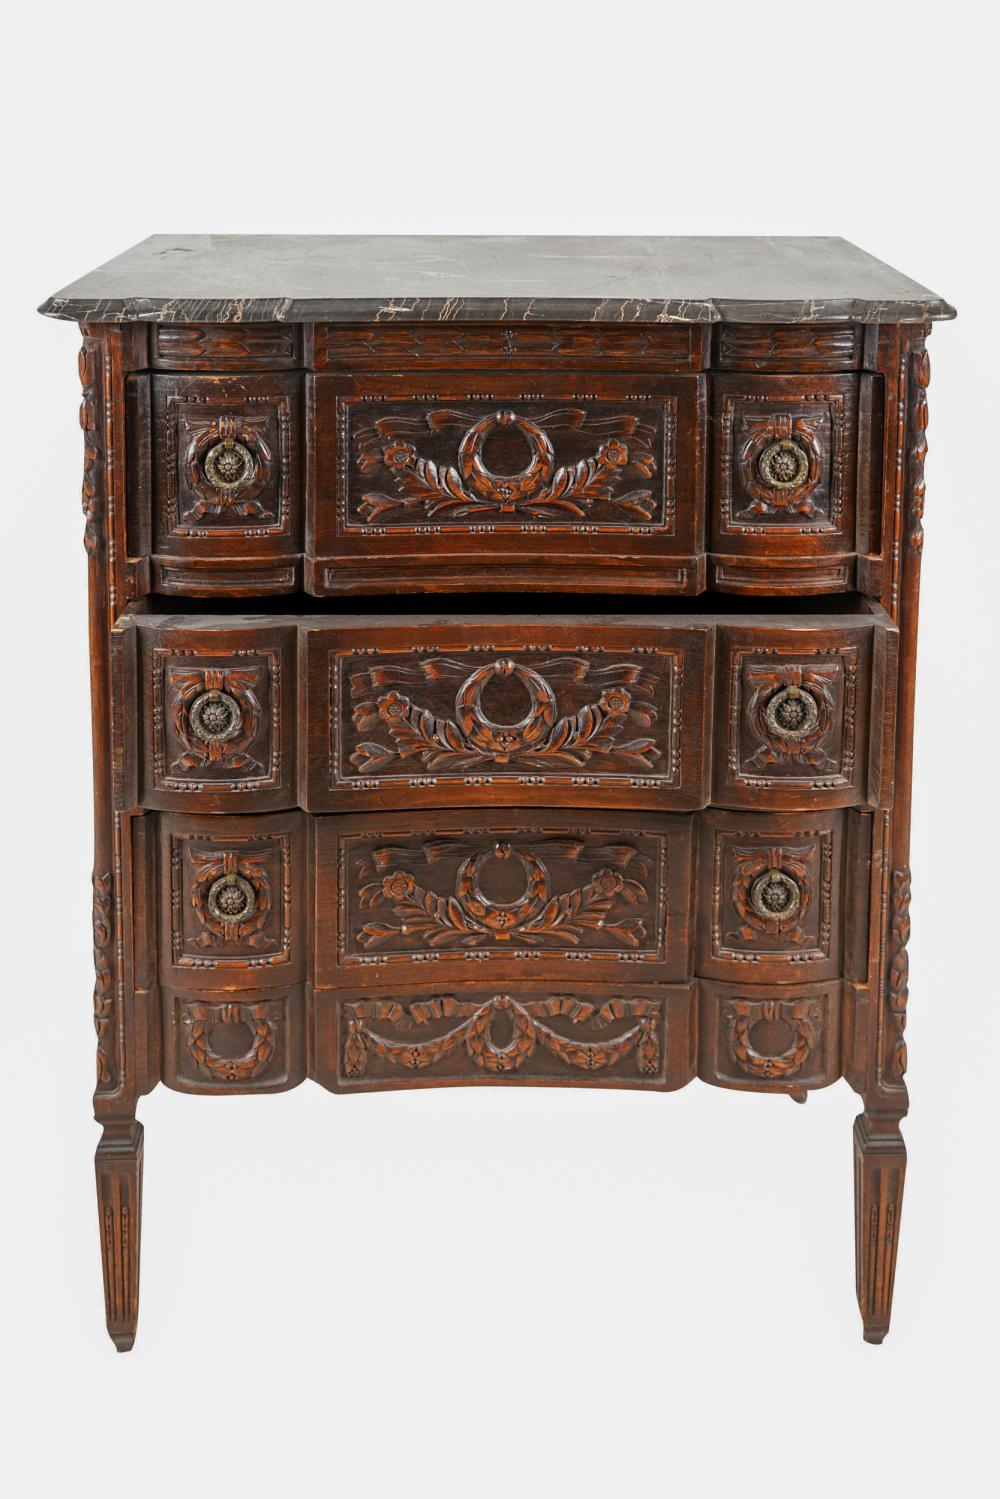 LOUIS XVI STYLE CARVED WOOD MARBLE-TOP